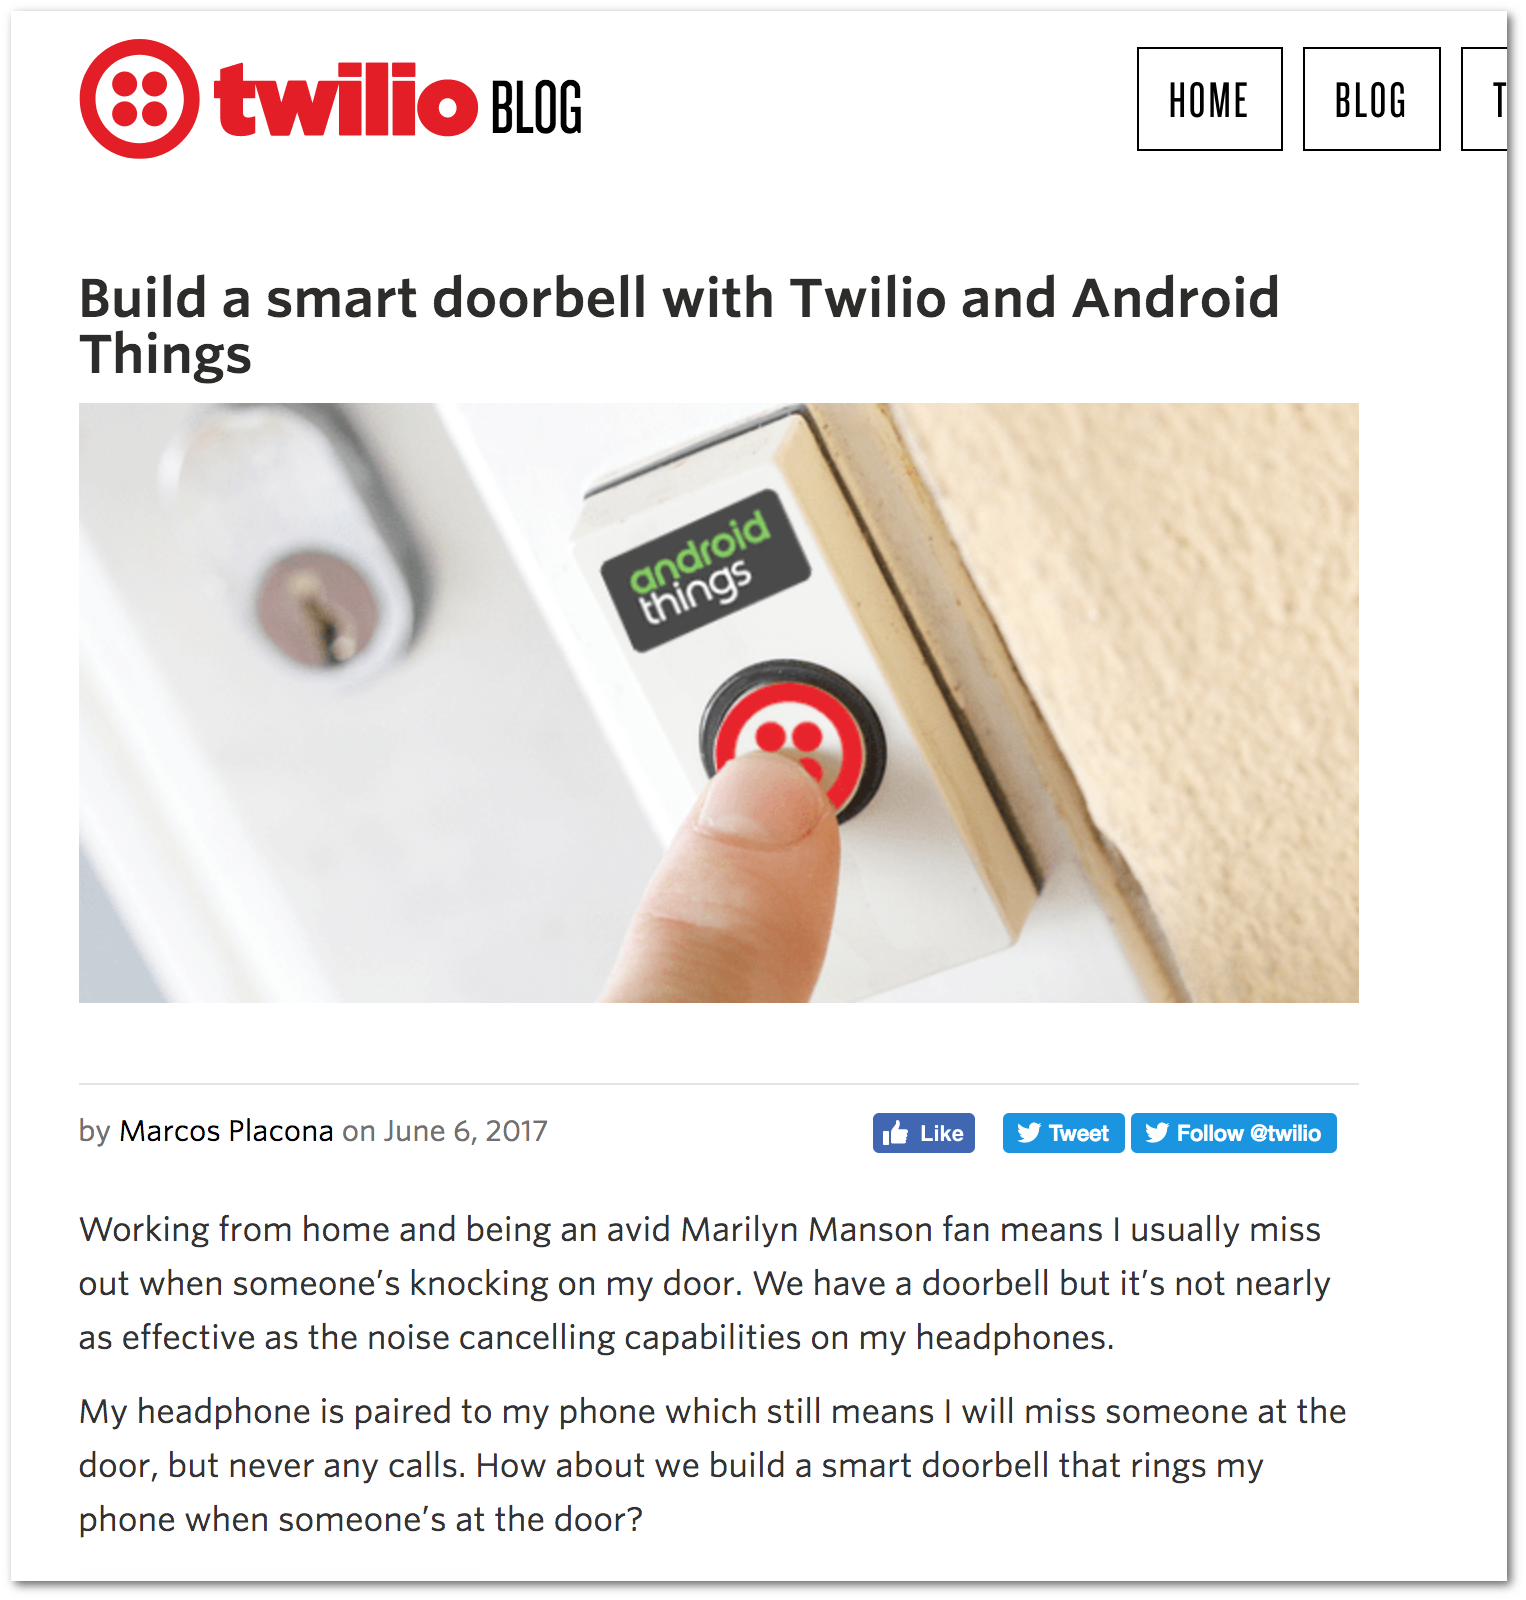 Examples of an integration: complete use case/tutorial with code snippets, written in plain English (Twilio blog)